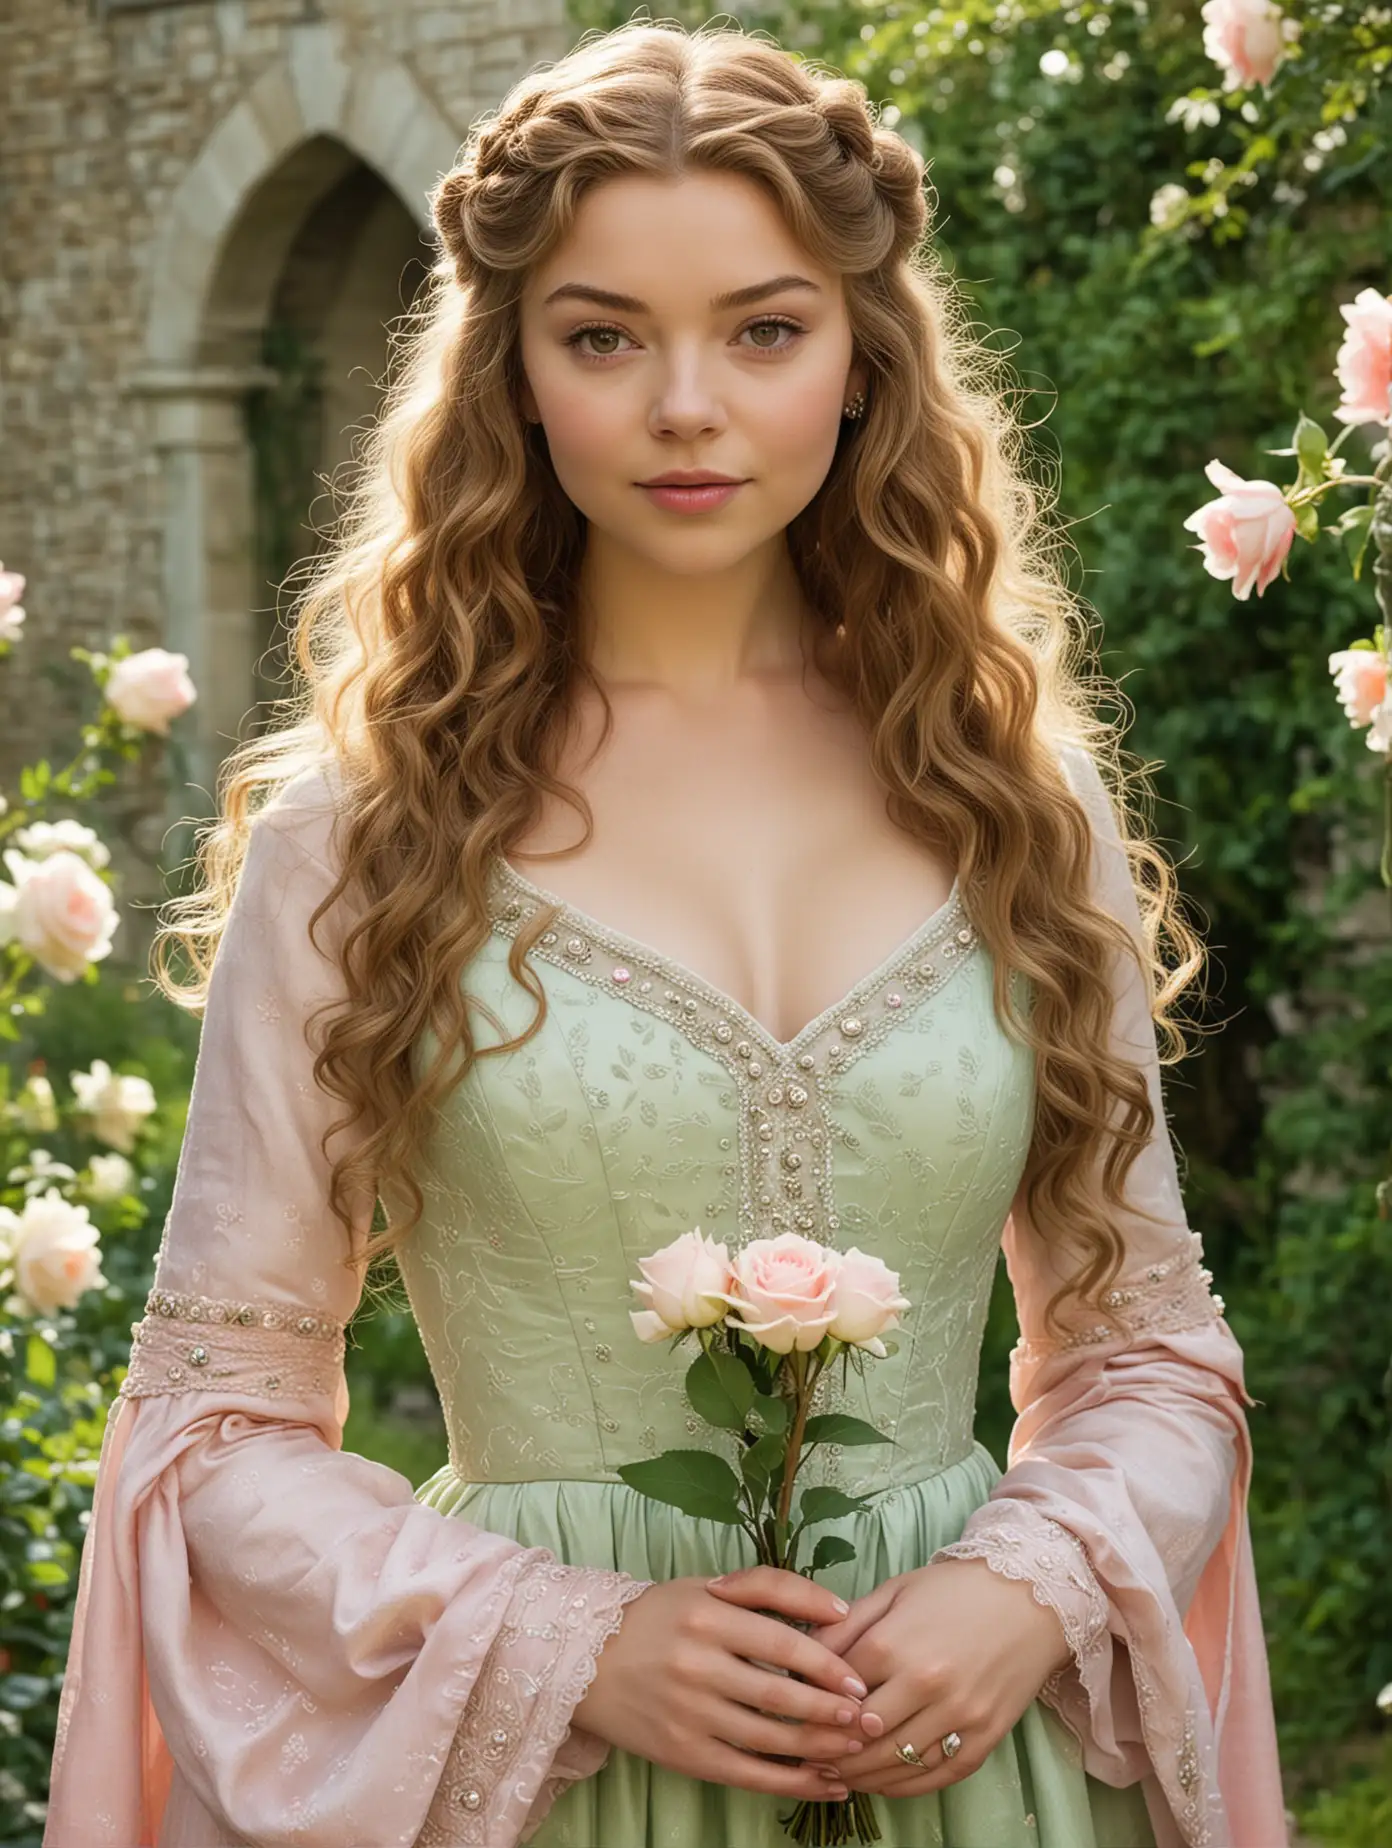 Margaery Tyrell, young teenage girl, with thick light brown curls, pale white skin, big brown eyes and small plump lips, wearing a light green and pink gown, holding gentle sprig roses, in a green garden background, medieval setting